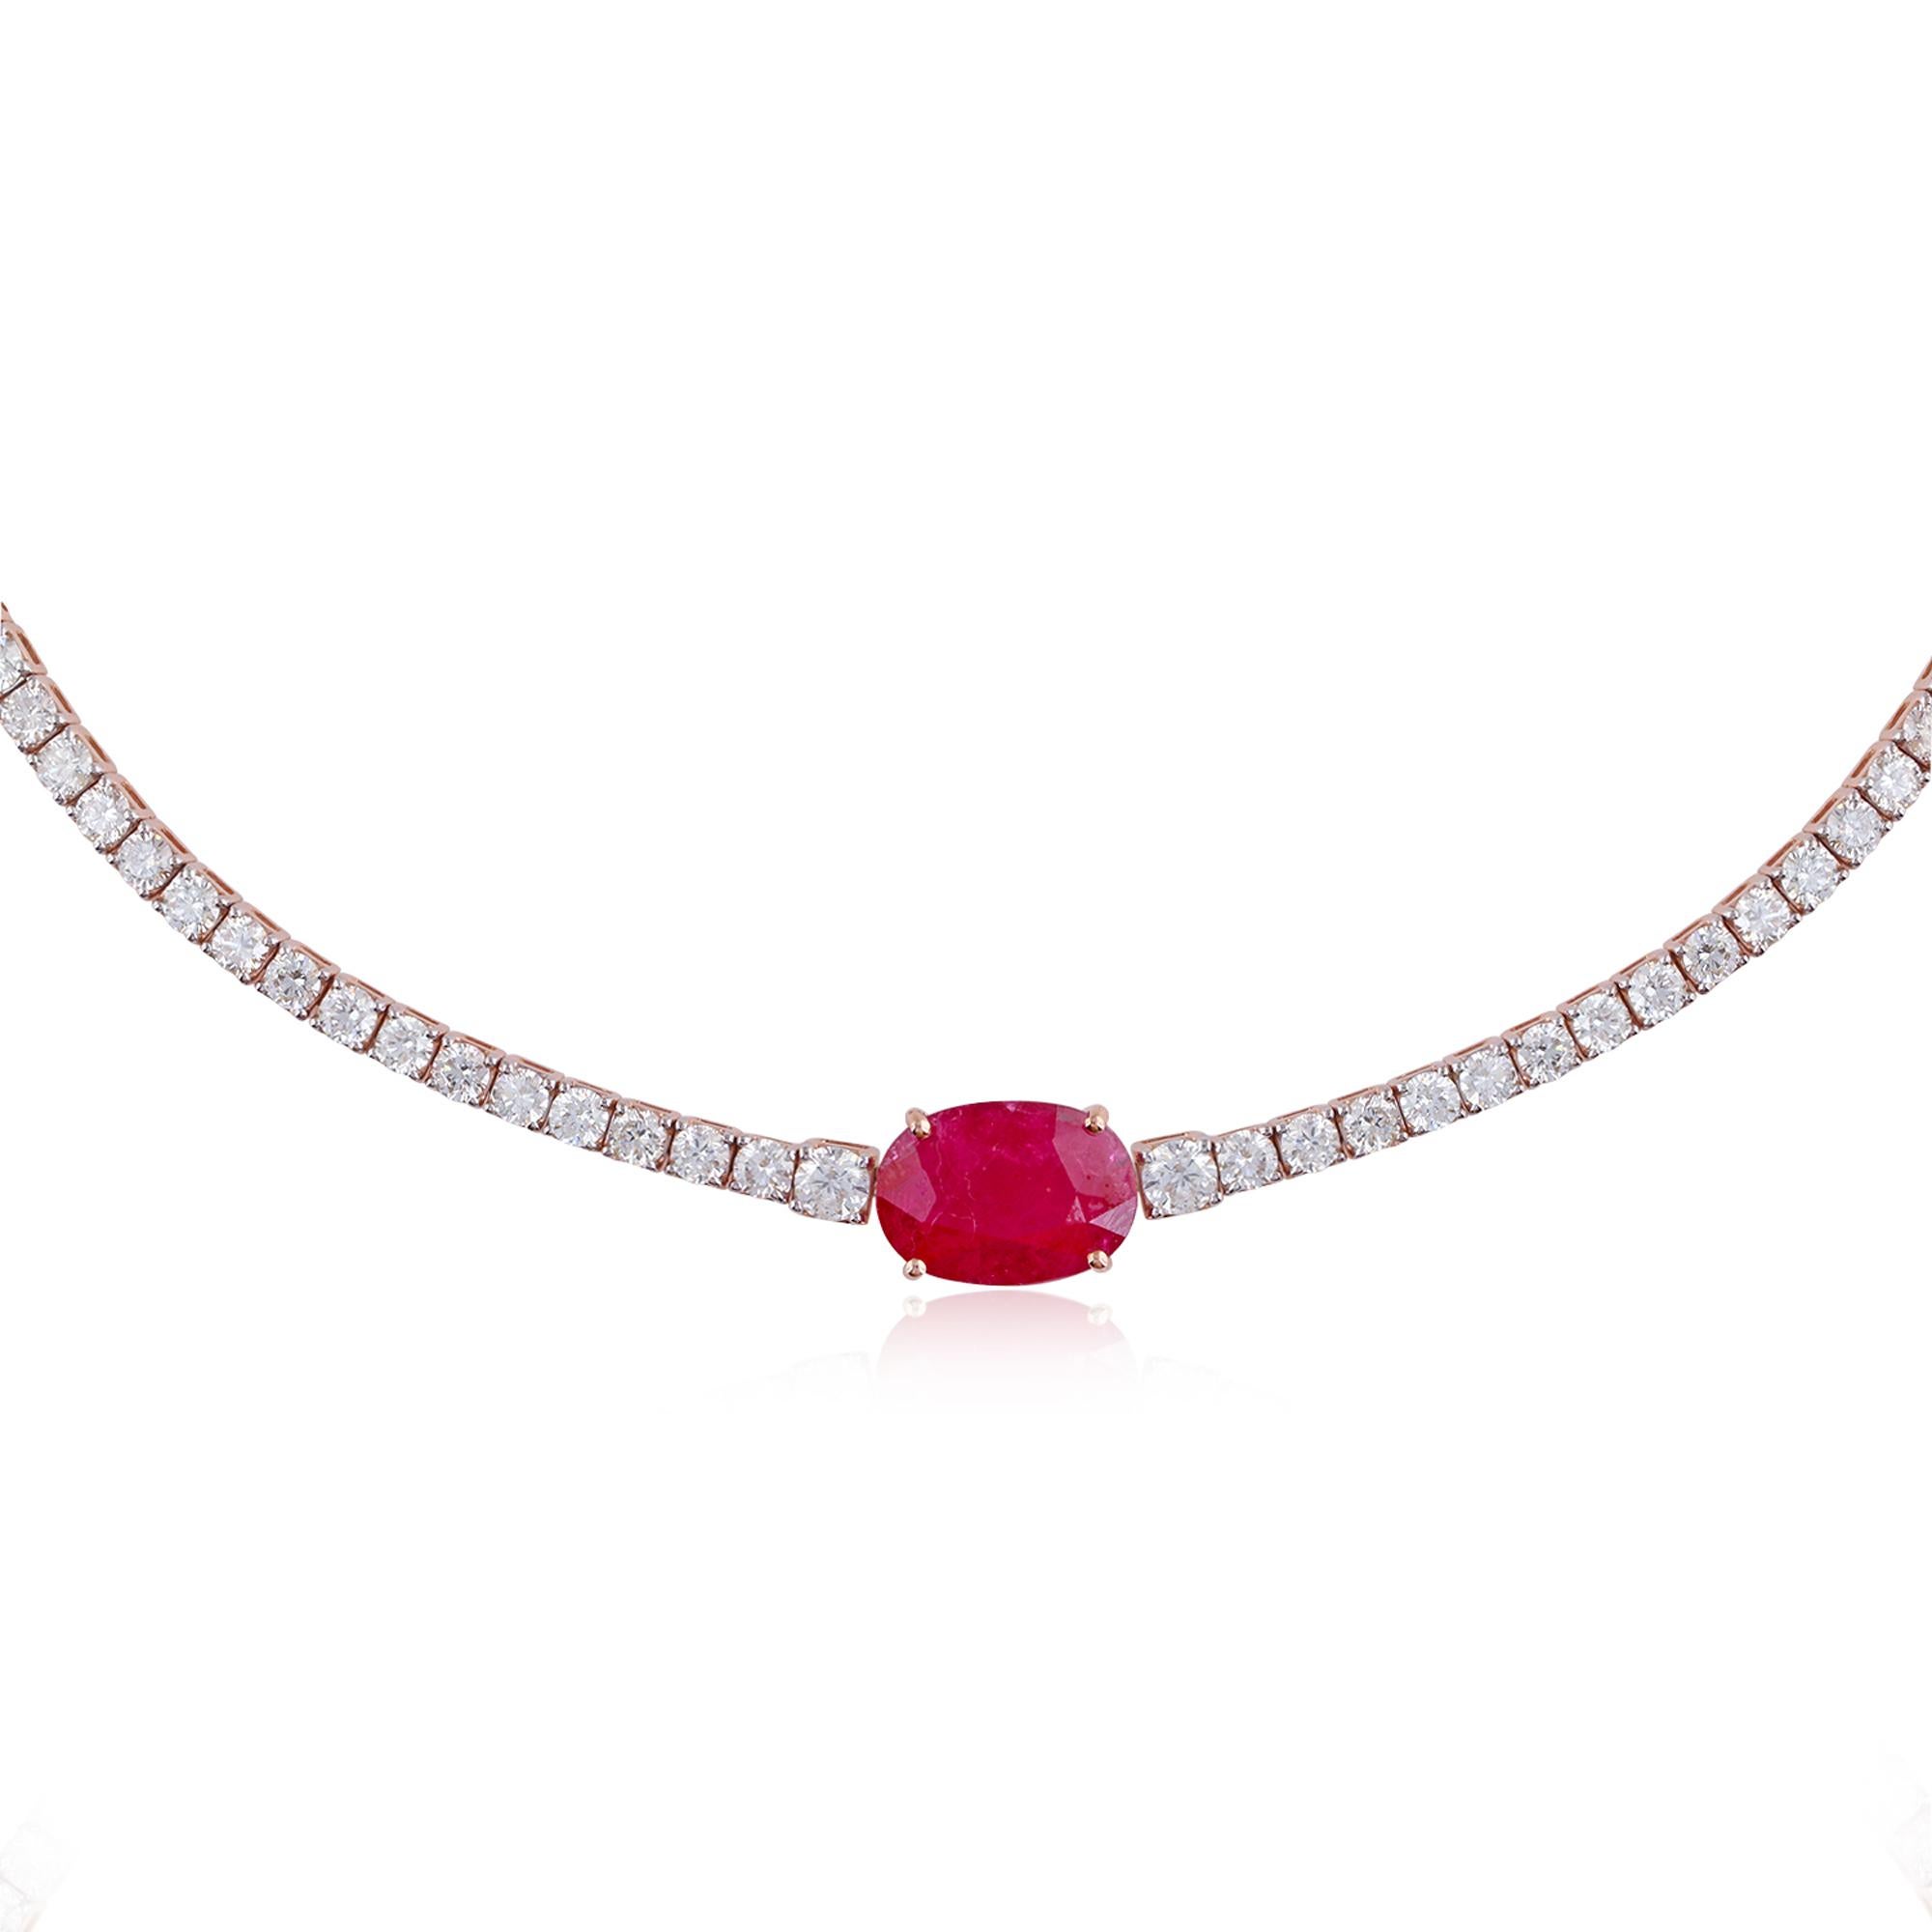 This Oval Ruby Gemstone Choker Necklace is a versatile accessory suitable for various occasions. Whether worn for a glamorous event, a romantic evening, or as an everyday statement piece, it effortlessly exudes elegance and luxury. It is also a